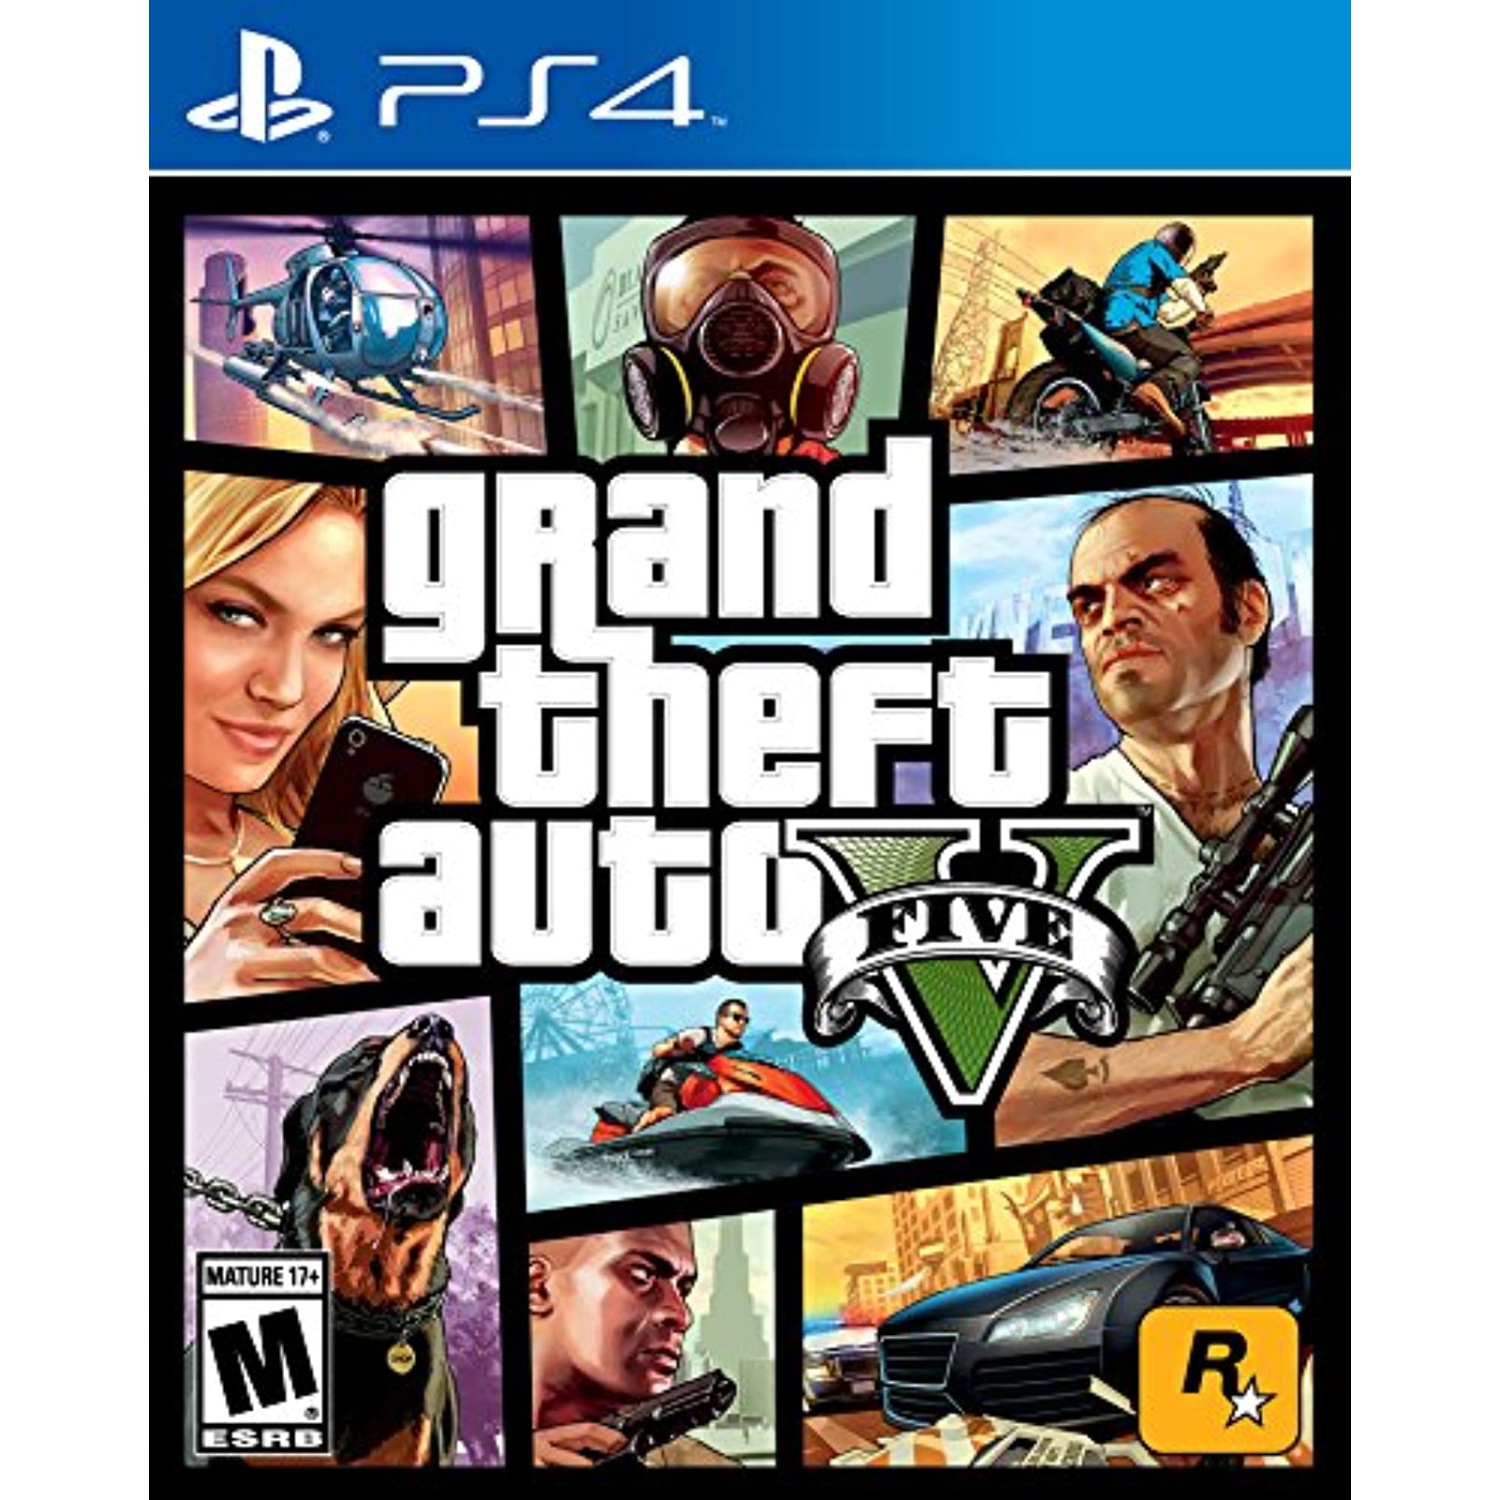 Previously Played - Rockstar Games Grand Theft Auto V For PS4 PlayStation 4